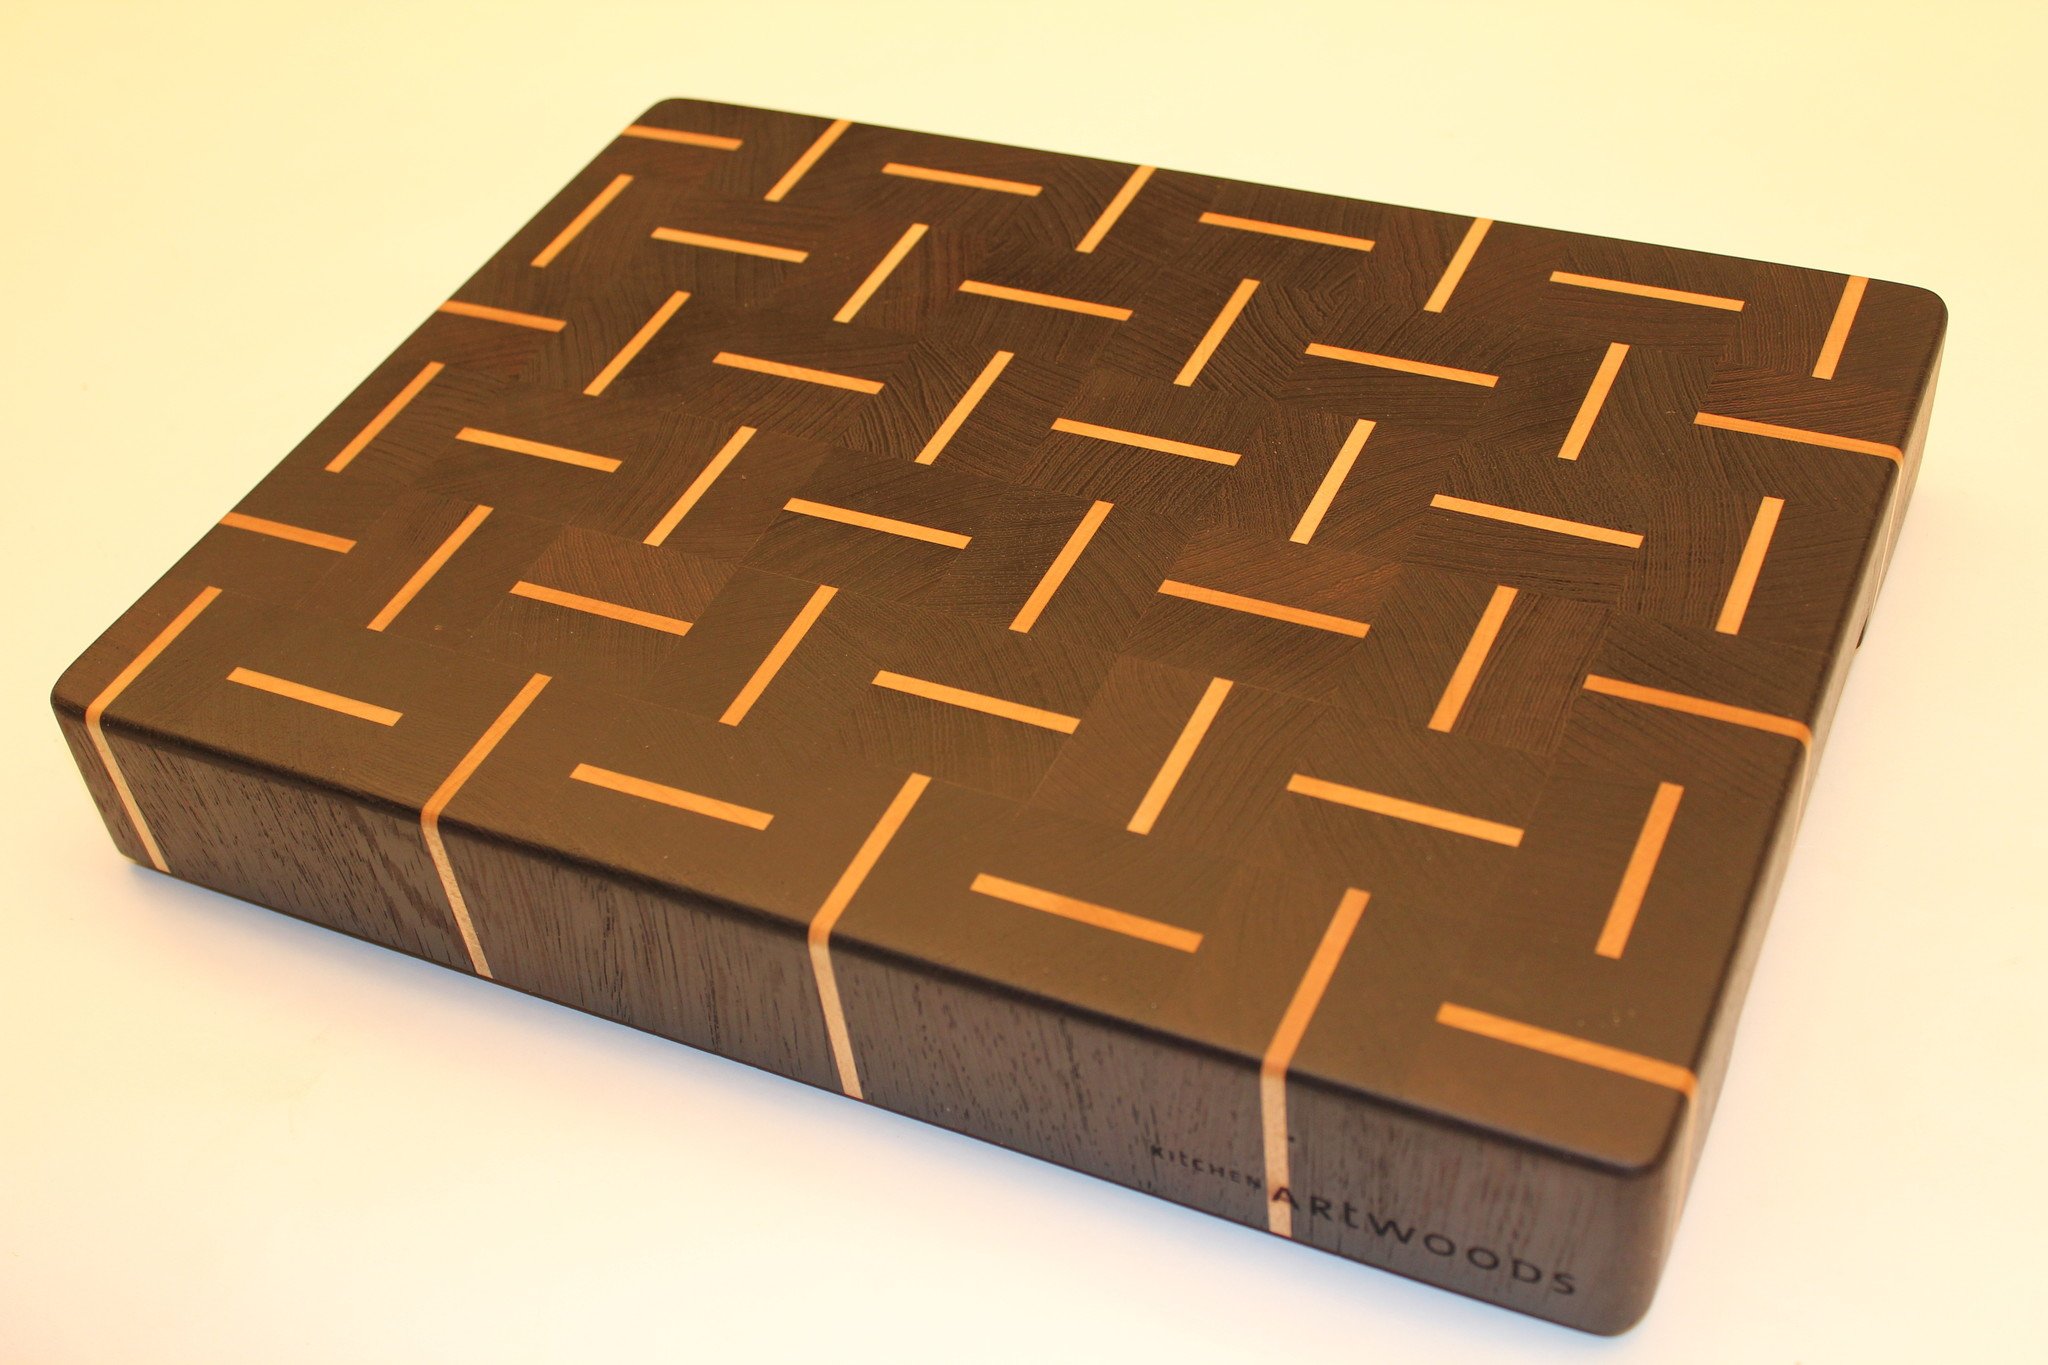 End grain cutting board of dark wenge wood with alternating stripes of hard maple